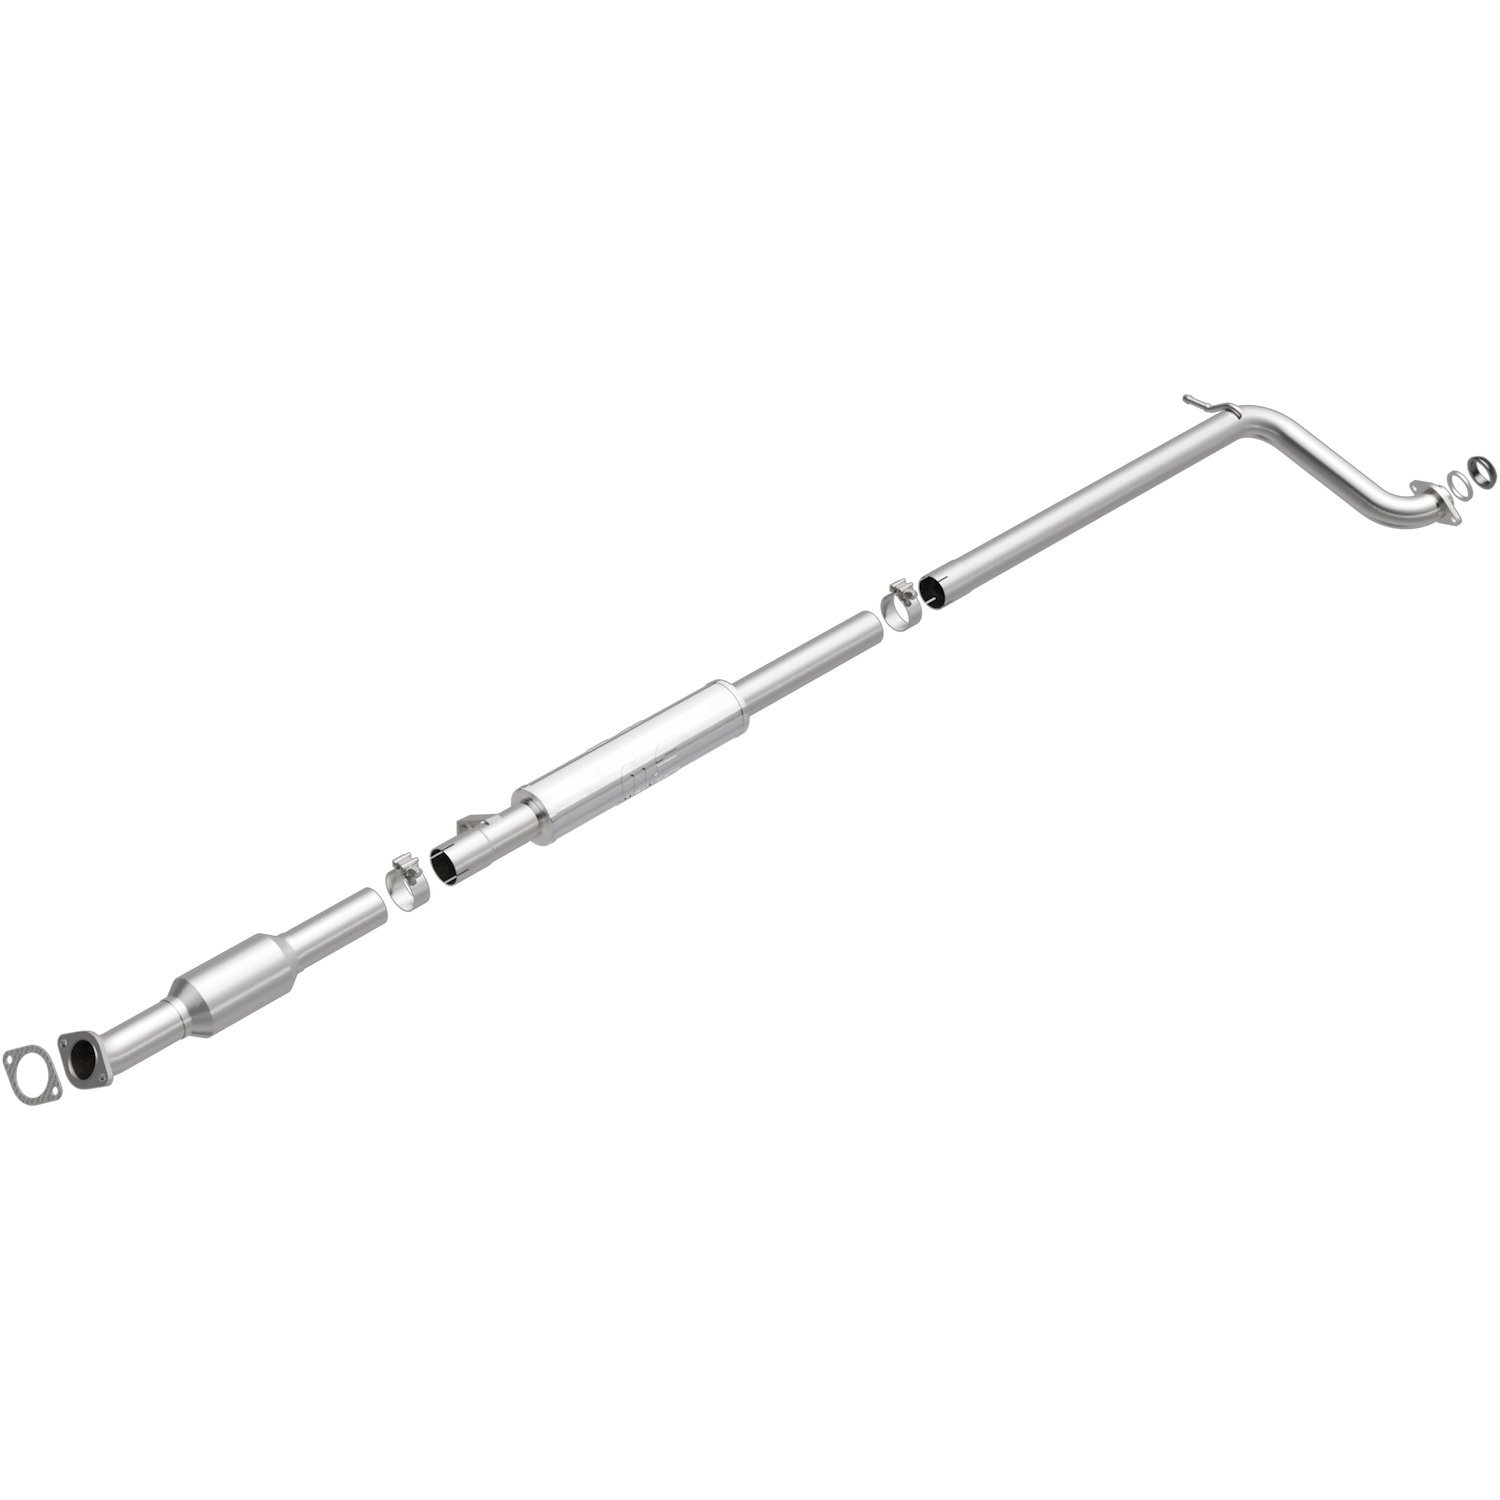 2004-2006 Mitsubishi Galant OEM Grade Federal / EPA Compliant Direct-Fit Catalytic Converter